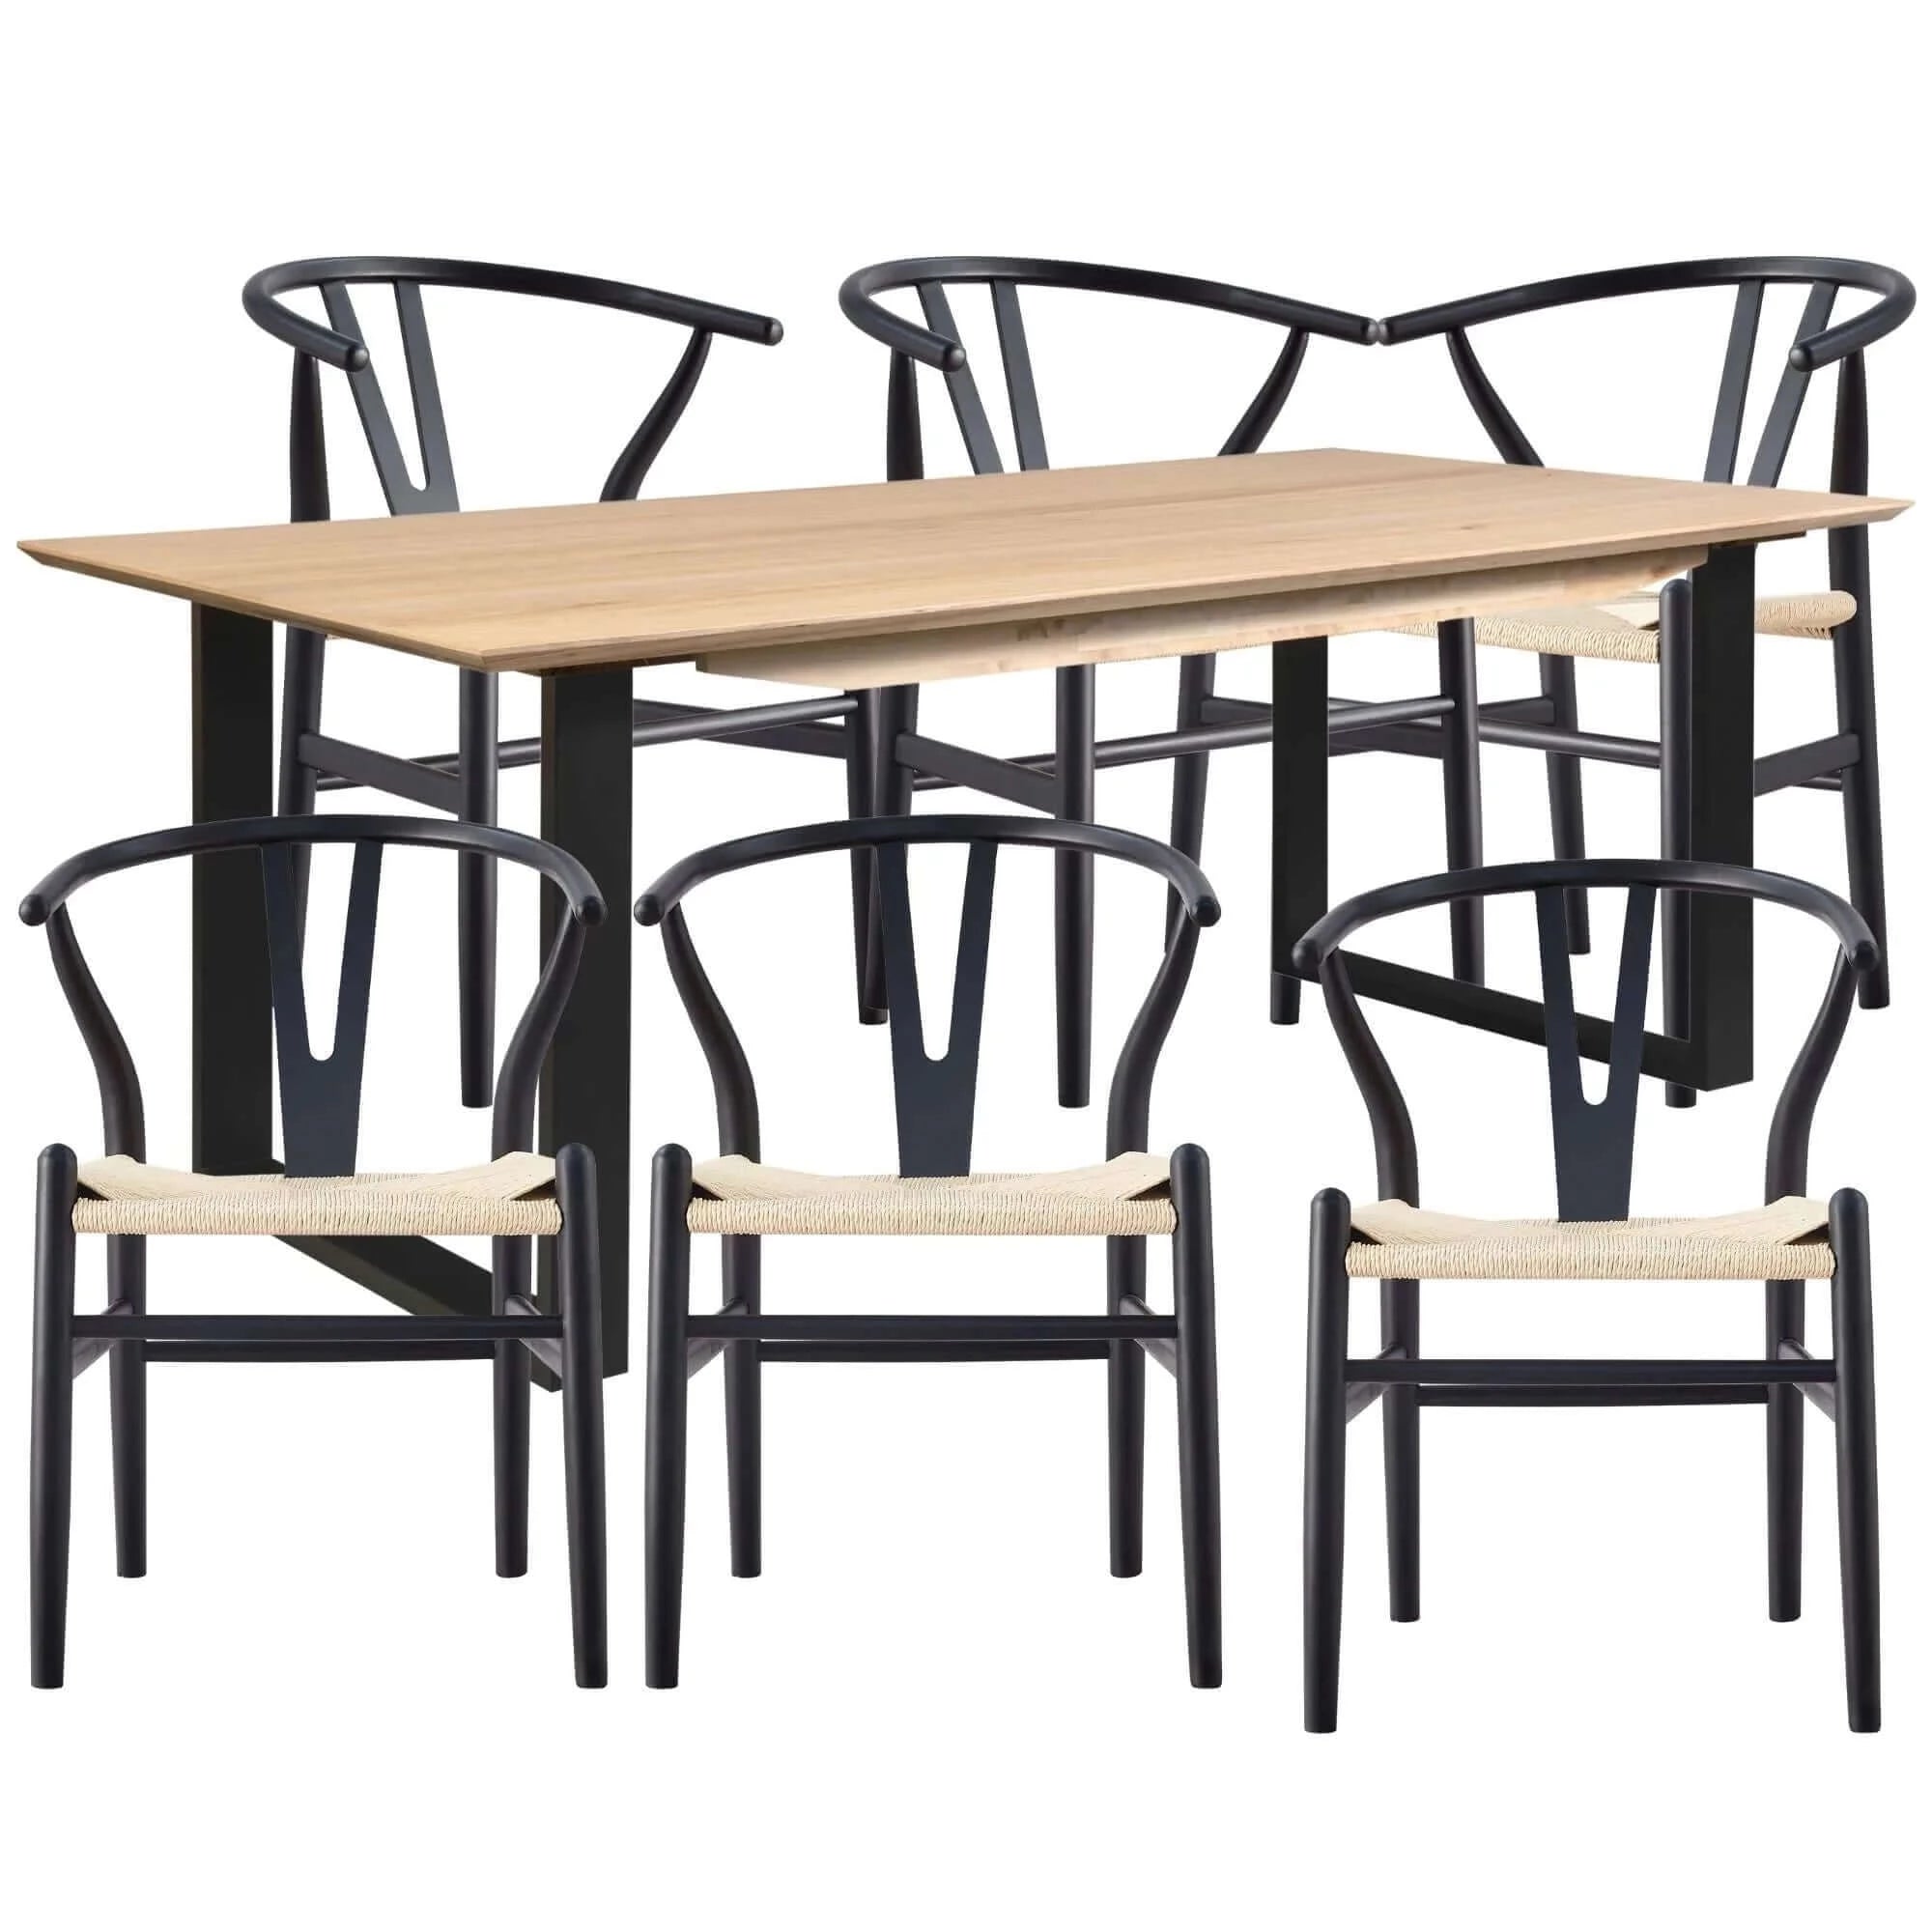 Buy aconite 7pc 180cm dining table set 6 wishbone chair solid messmate timber wood - upinteriors-Upinteriors